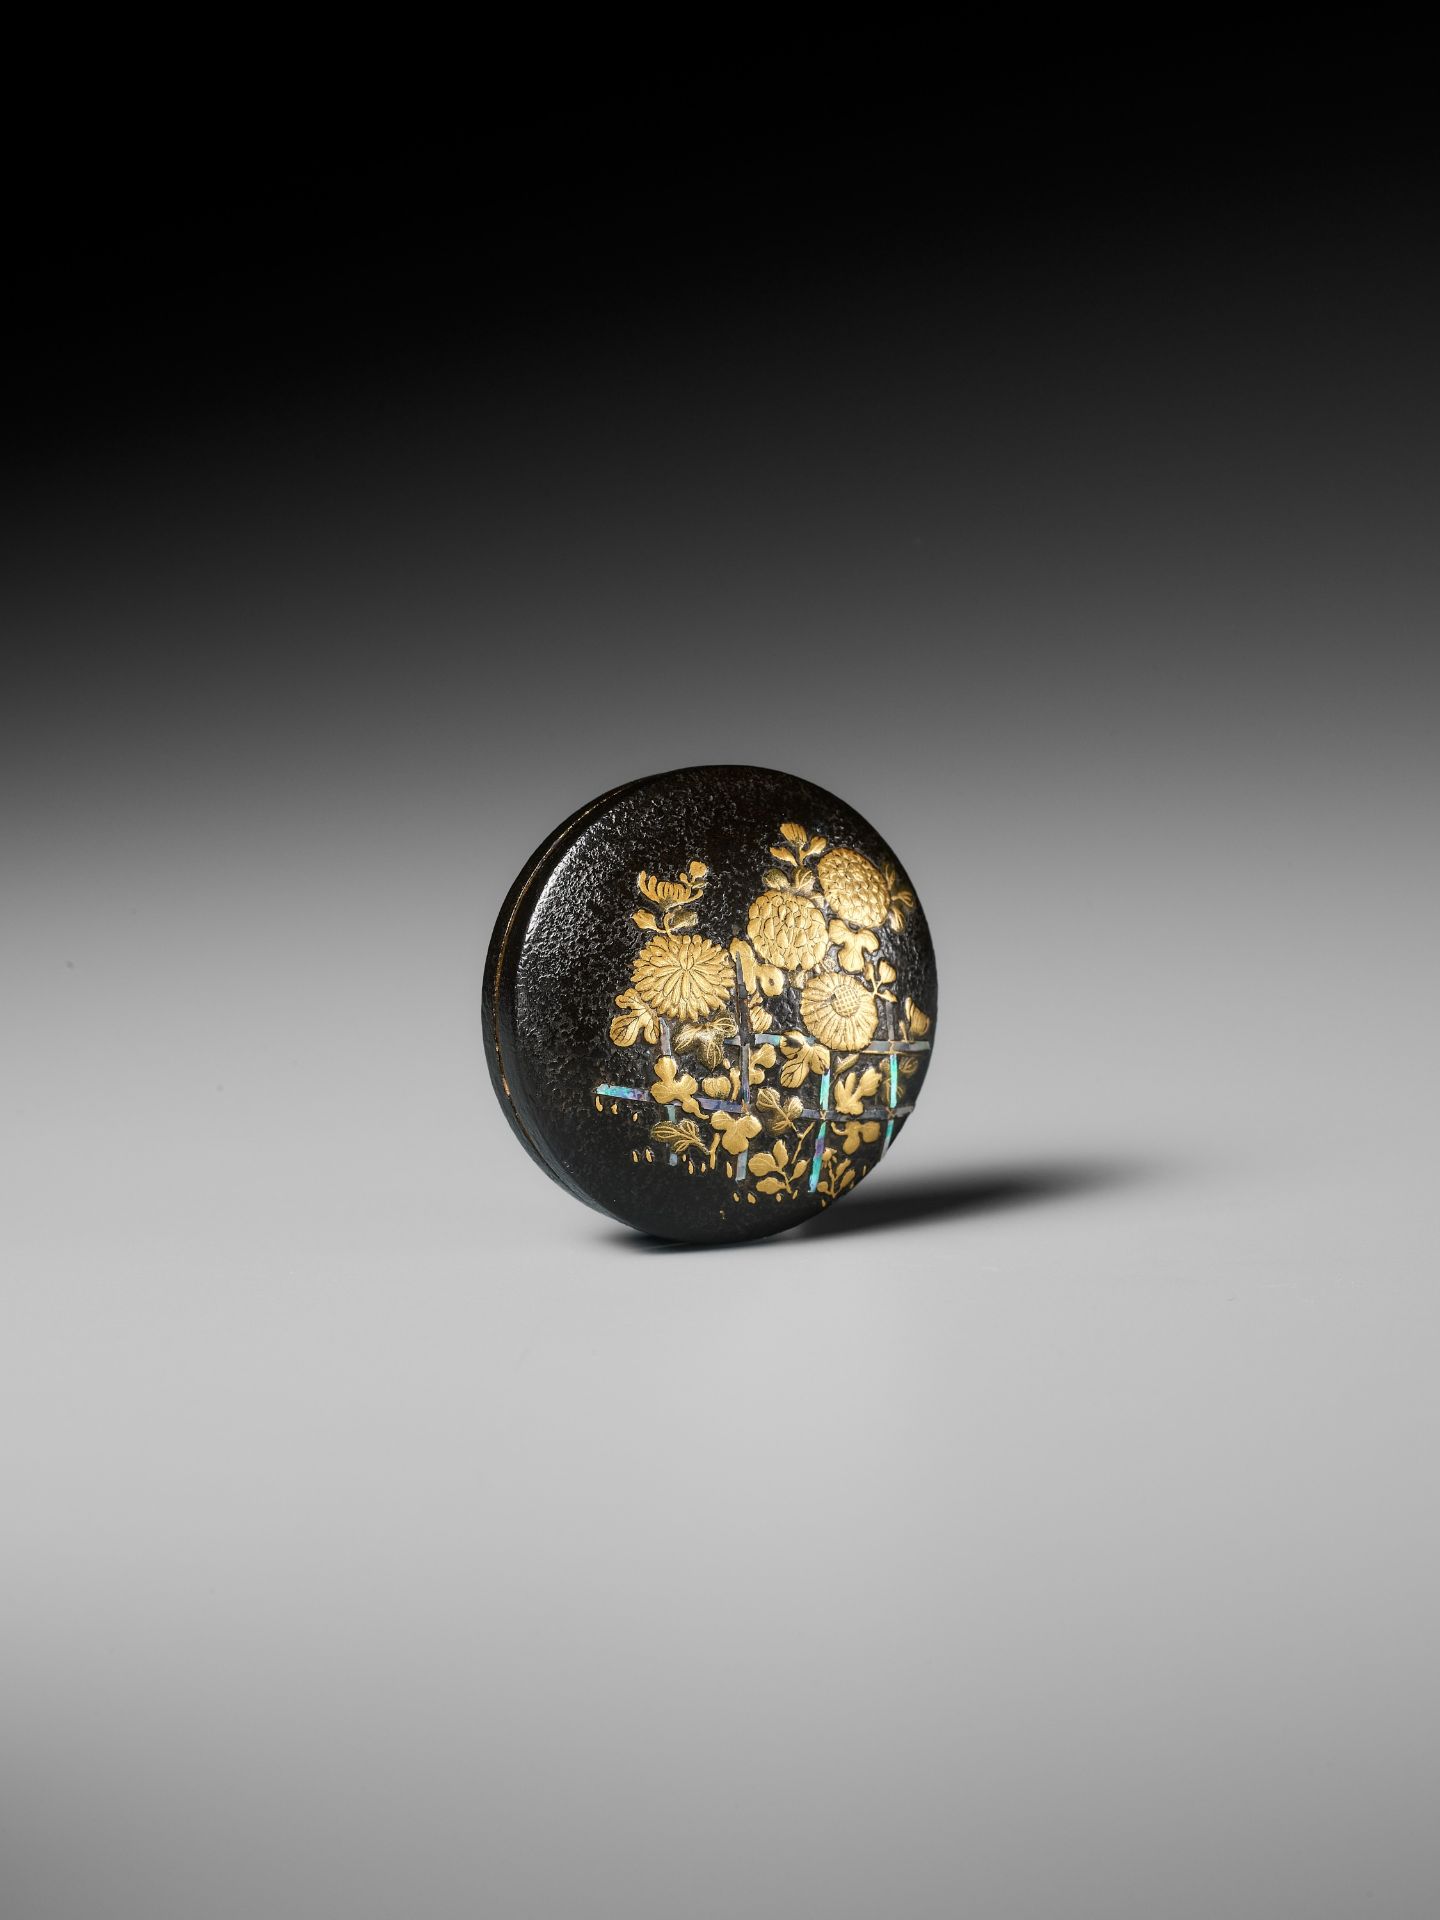 A LACQUERED WOOD MANJU NETSUKE DEPICTING CHRYSANTHEMUMS BY A FENCE - Image 4 of 8